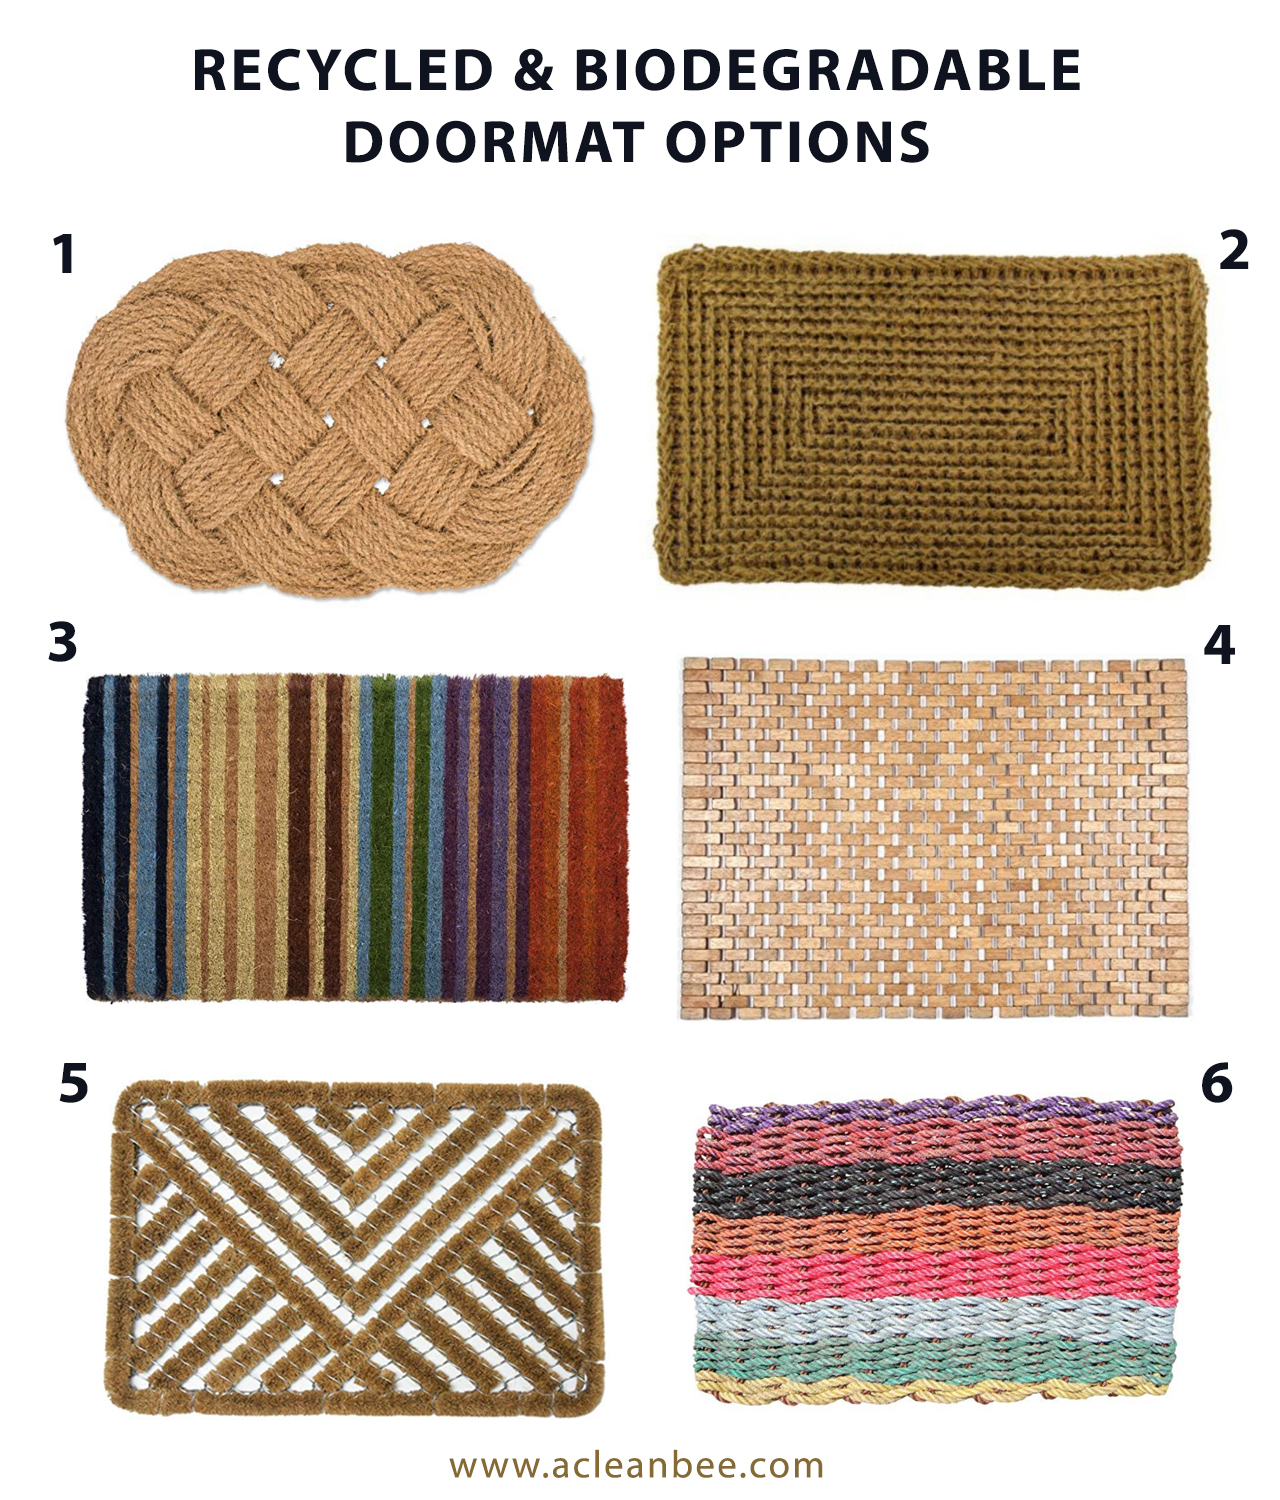 Recycled and biodegradable doormat options